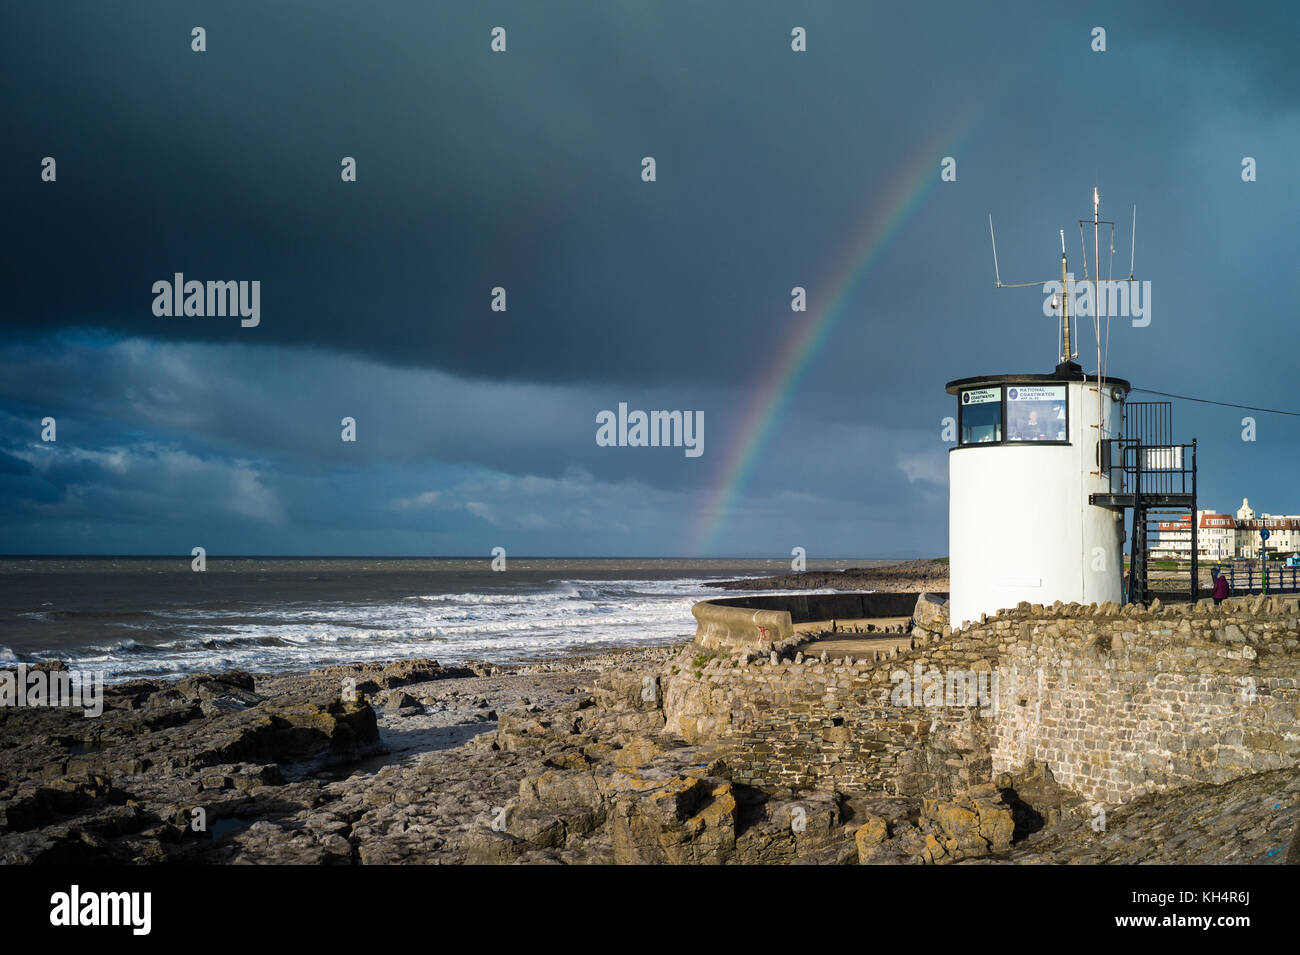 National Coastwatch tower at Porthcawl in South Wales. Coastwatch is a volountary charity keeping watch along the UK's coasts, Stock Photo